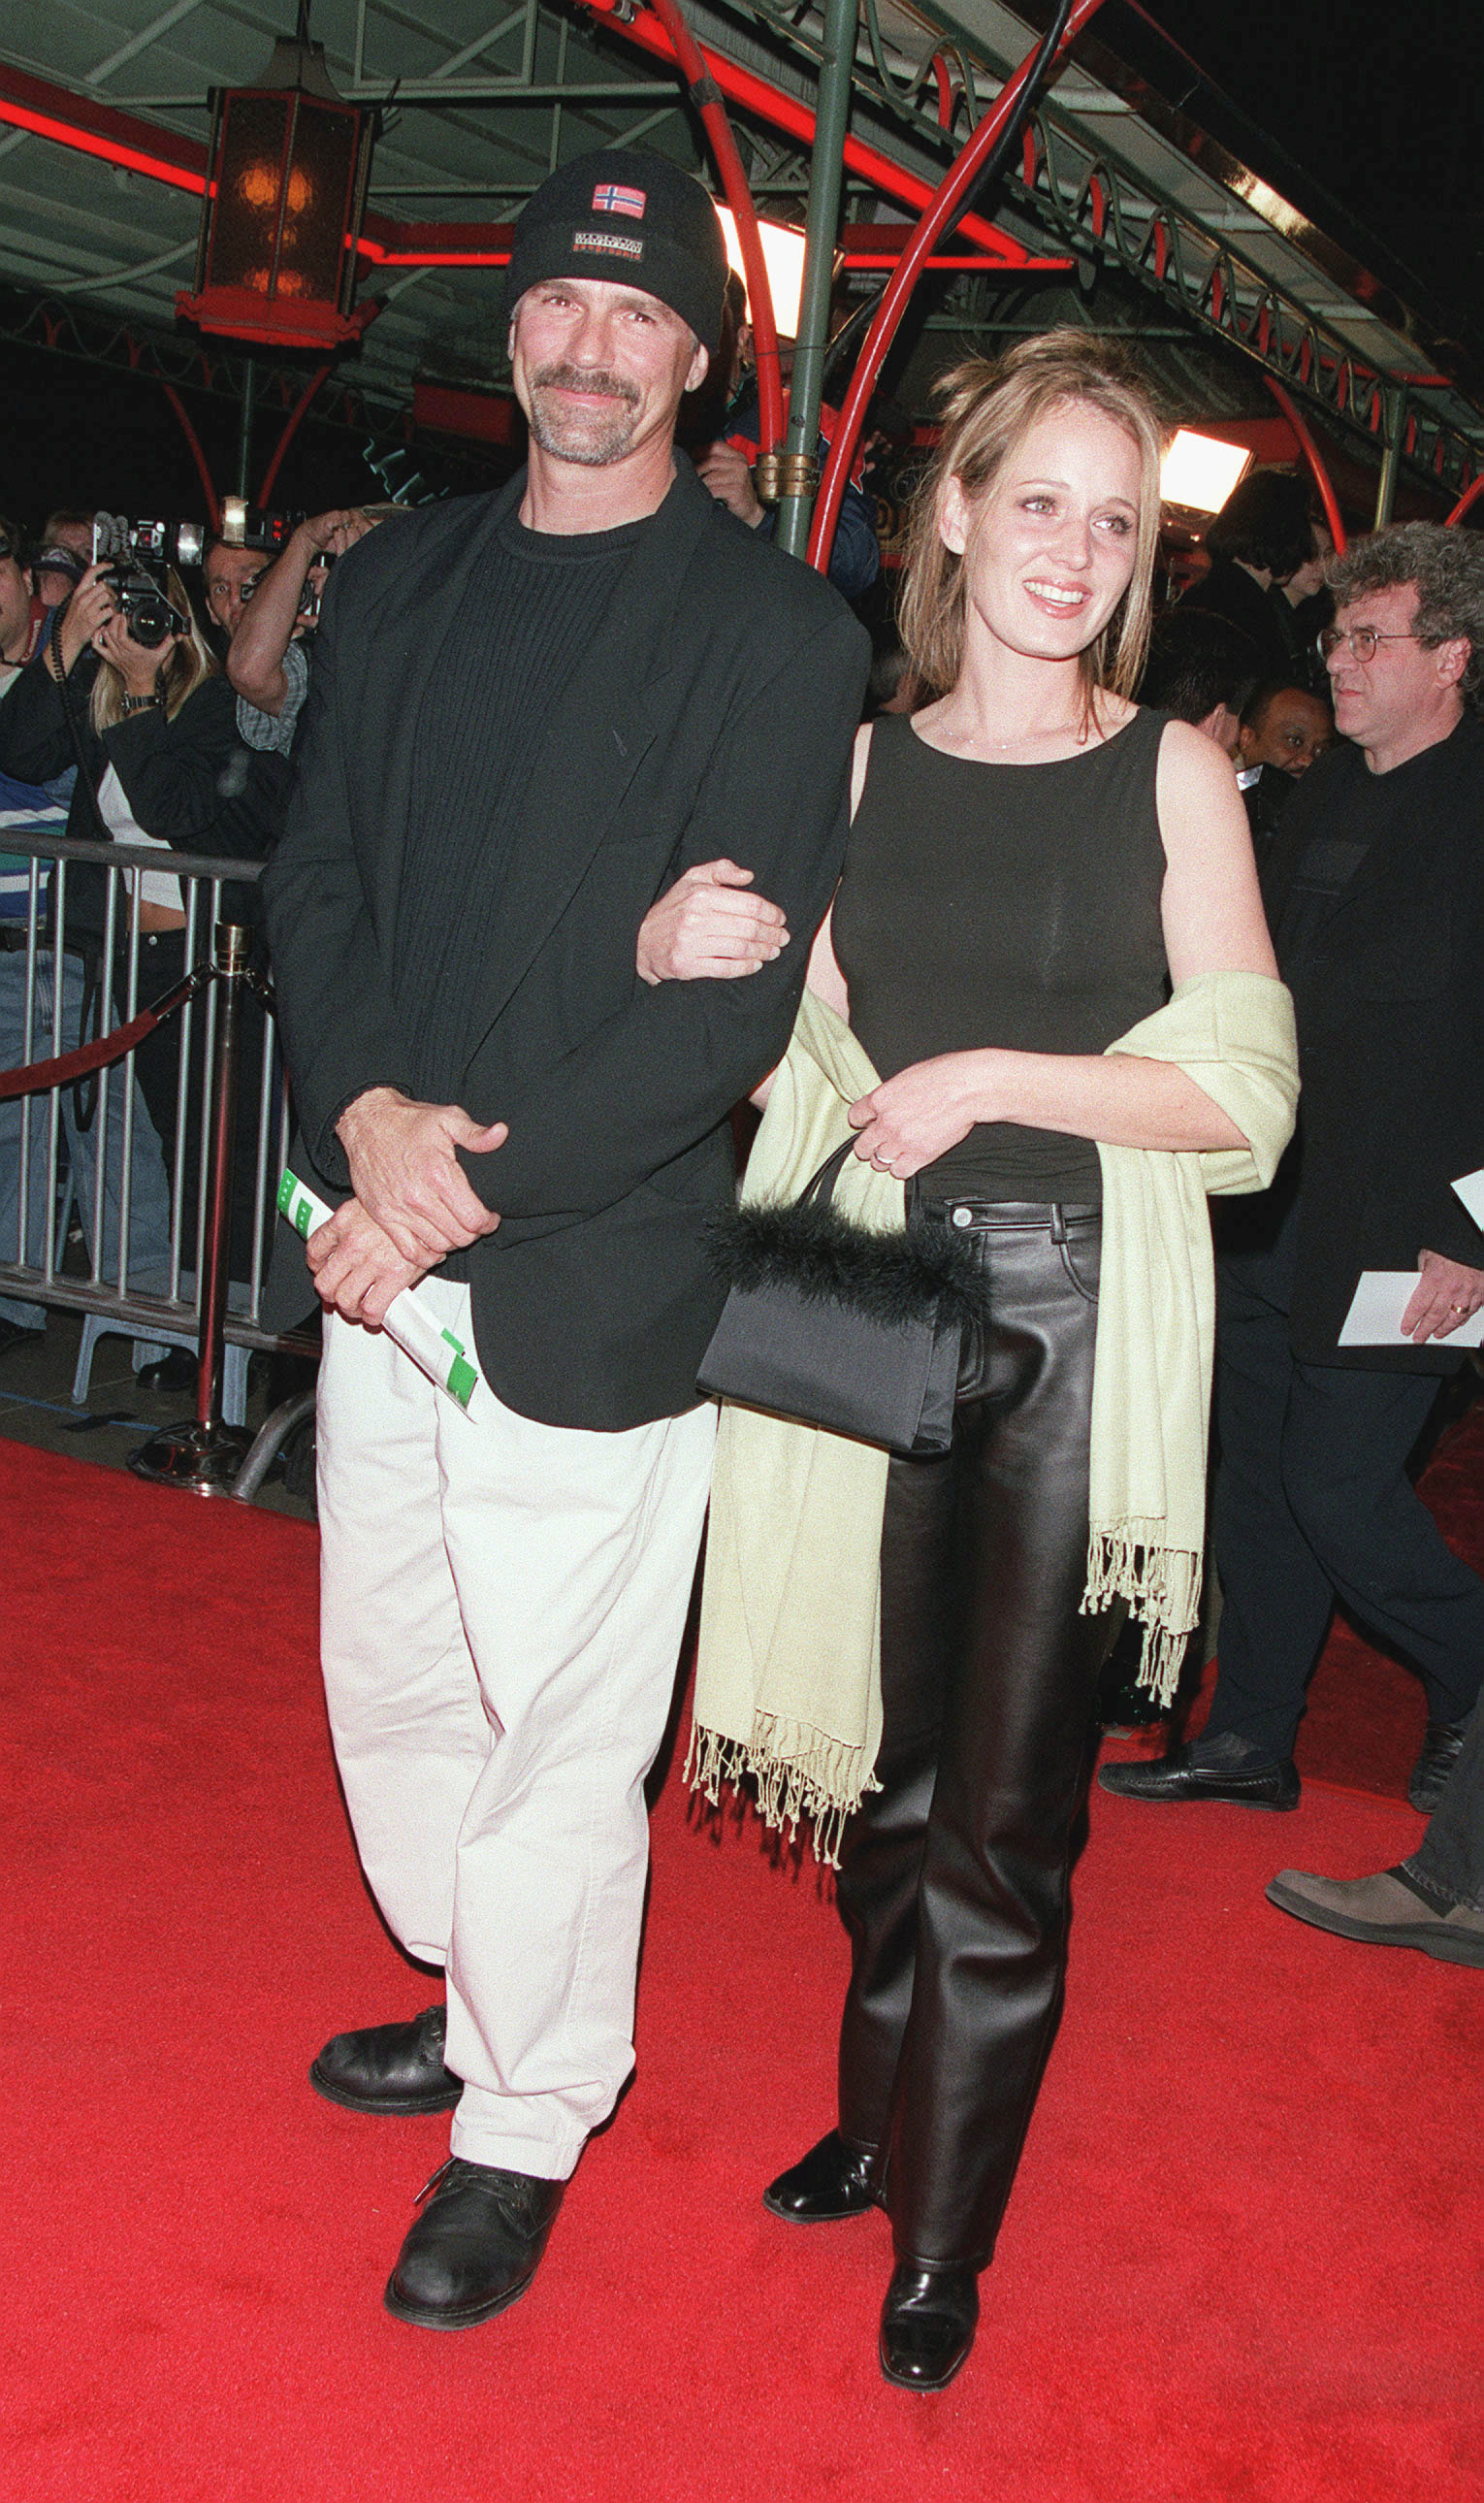 Richard Dean Anderson and Apryl Prose at the premiere of "The Man on The Moon" on December 20, 1999 | Source: Getty Images